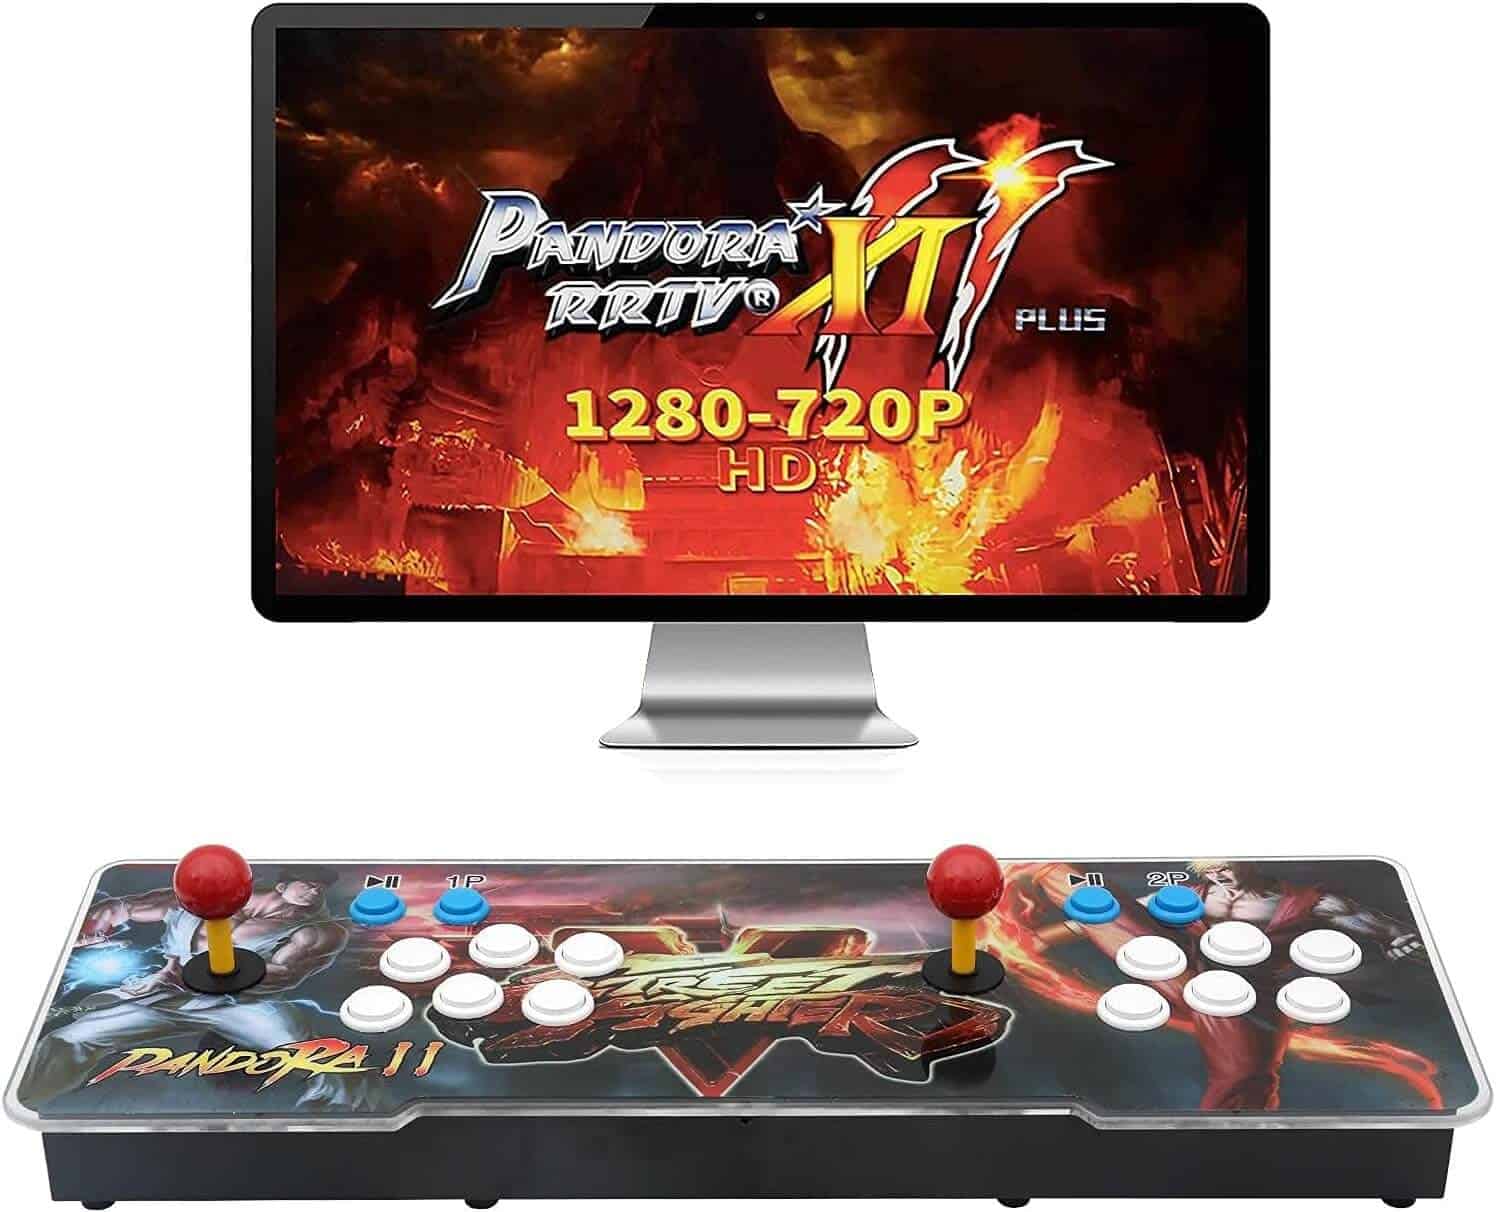 3D arcade console system with 5000 games. Support VGA & HDMI & USB Output, Suitable for TV/PC/PS3/Xbox 360/Screen/Monitor/Projector and so on. 